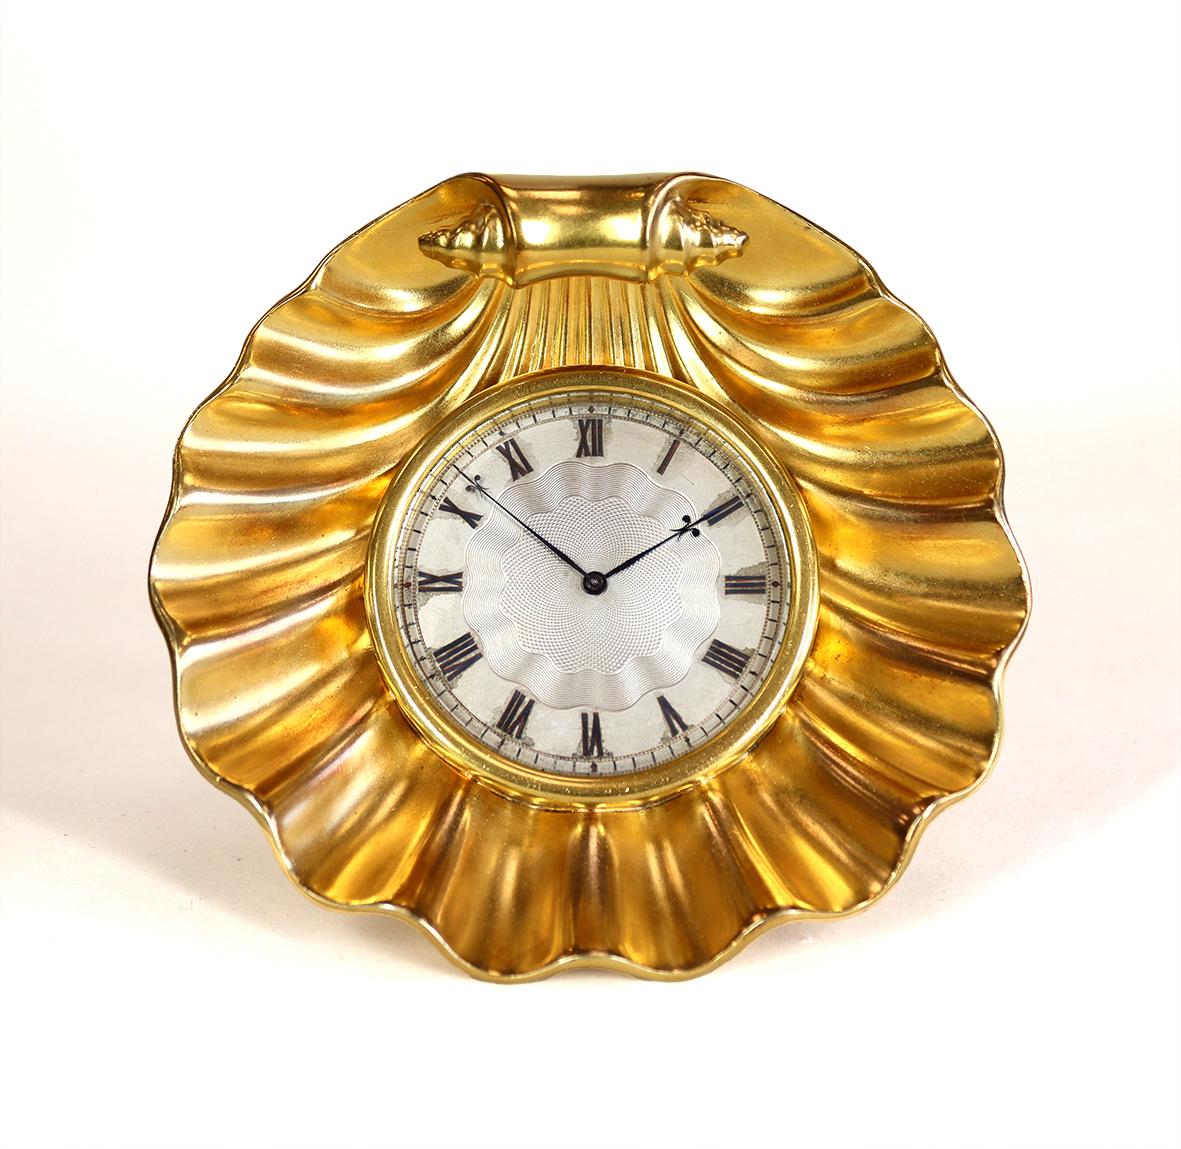 This beautiful desk timepiece is a rare strut clock, in the form of a gilded scallop shell, with an engine turned silvered roman dial set behind a bevelled glass with distinctive fleur de lis hands. The the fine movement has an excellent lever